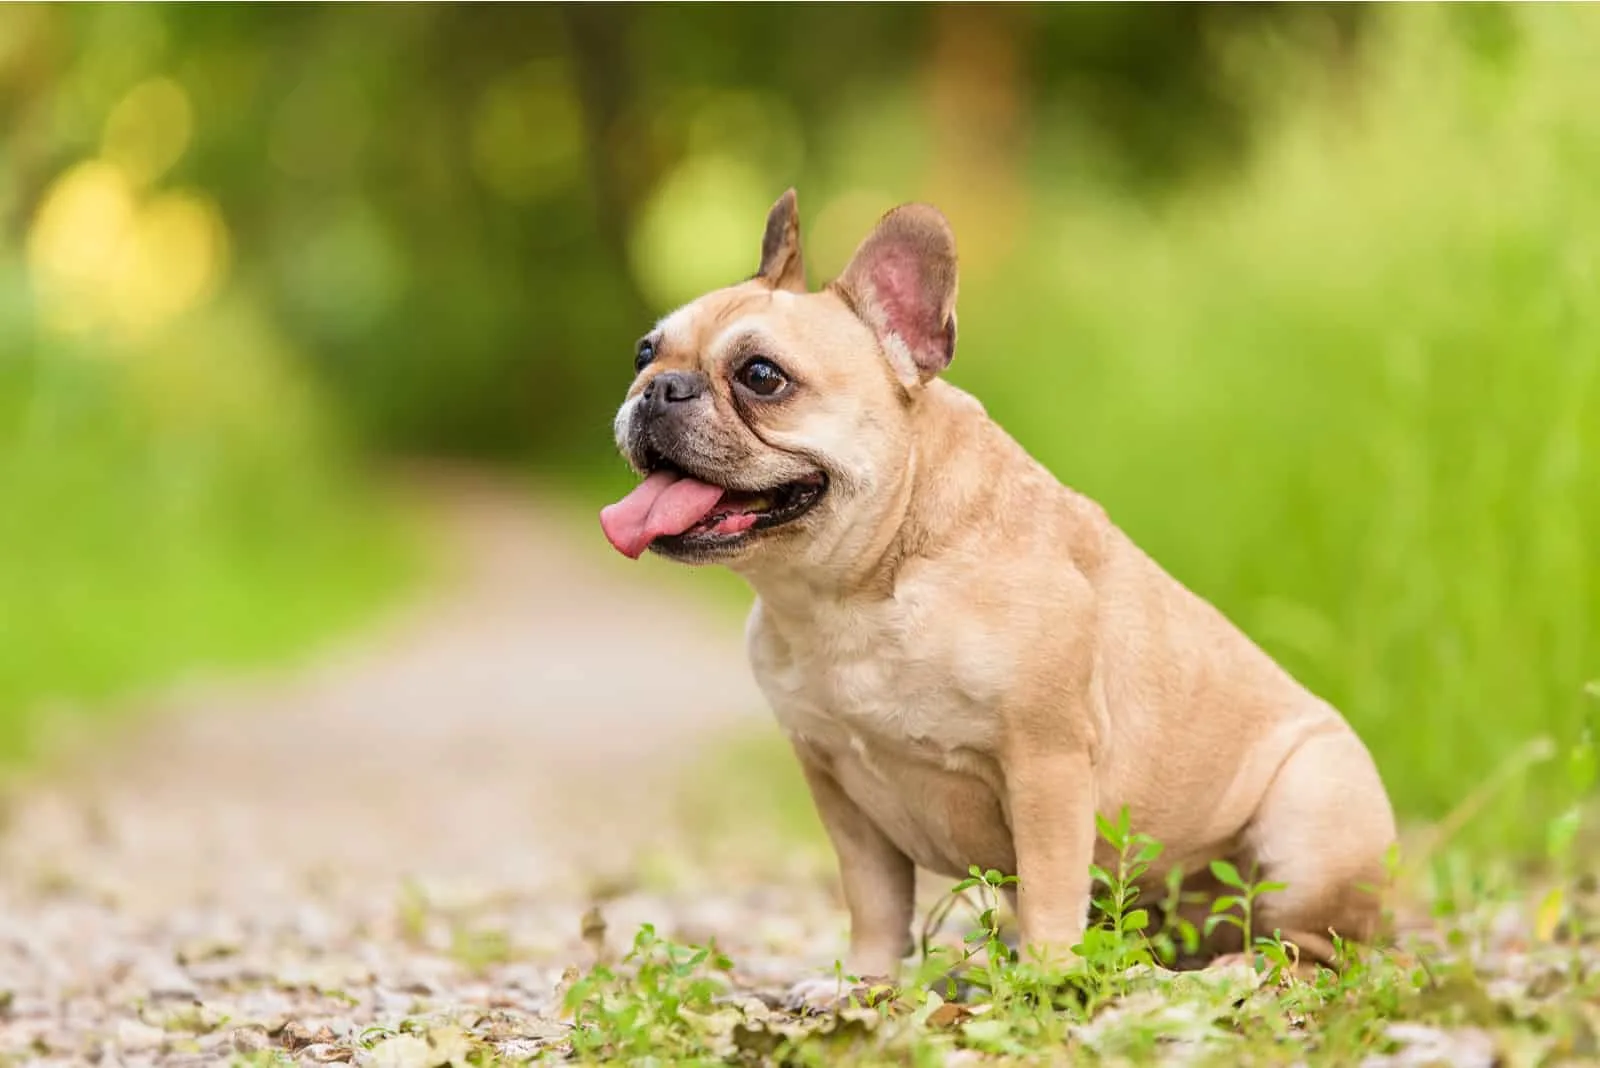 The French Bulldog sits with his tongue out